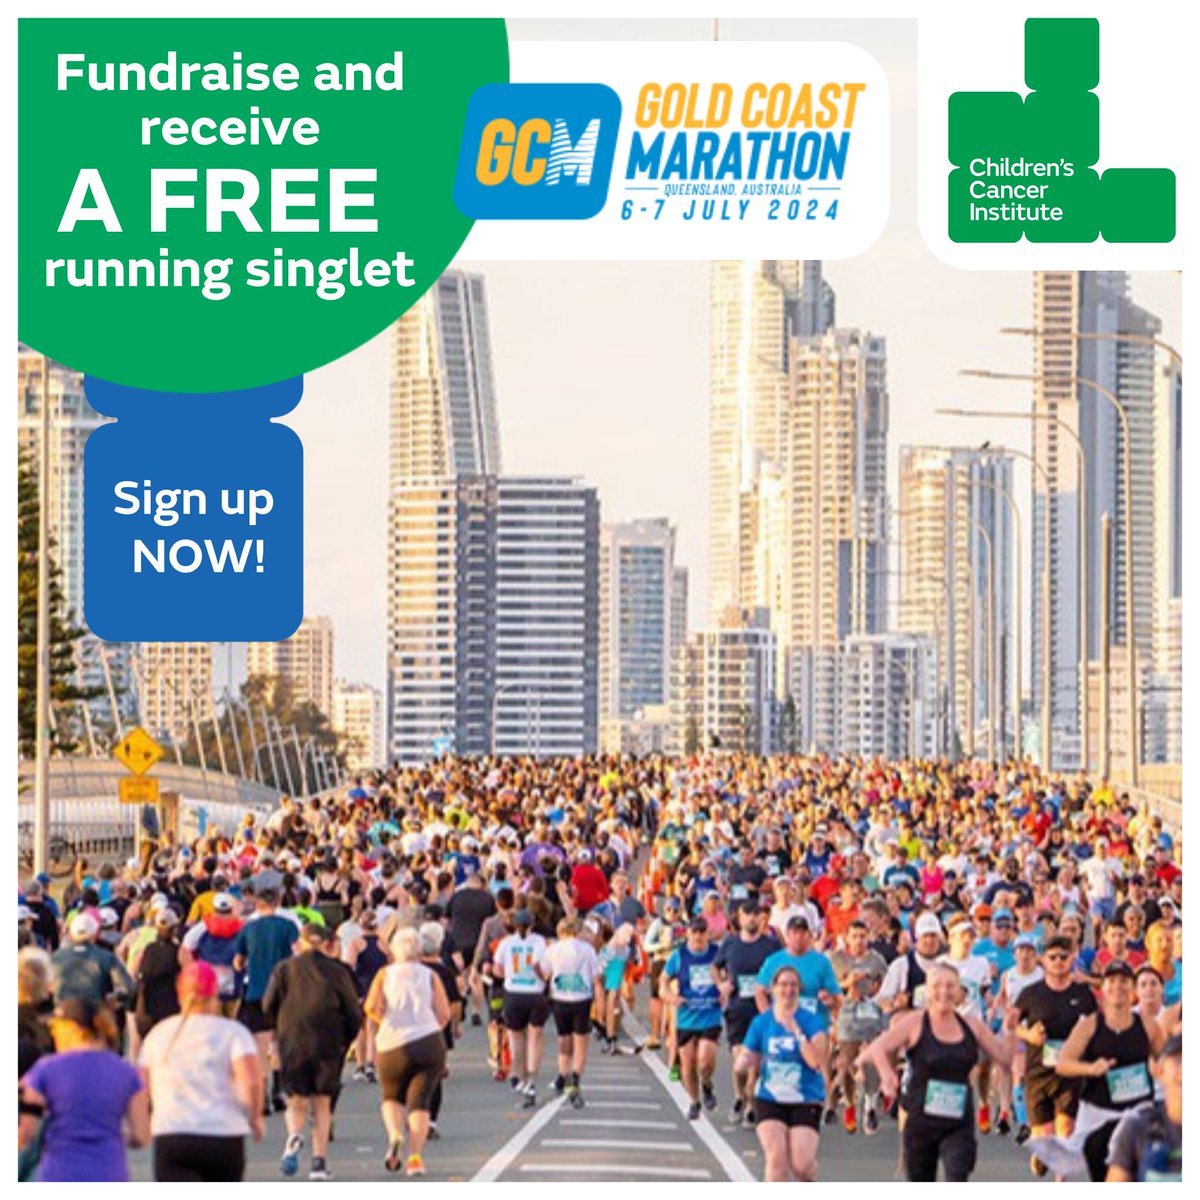 Early bird rego for Gold Coast Marathon closes soon and events are selling out quickly. Join our @KidsCancerInst Green Team and raise at least $100 to support critical childhood cancer research & you'll receive a FREE singlet Register today: ccia.support/GCM24